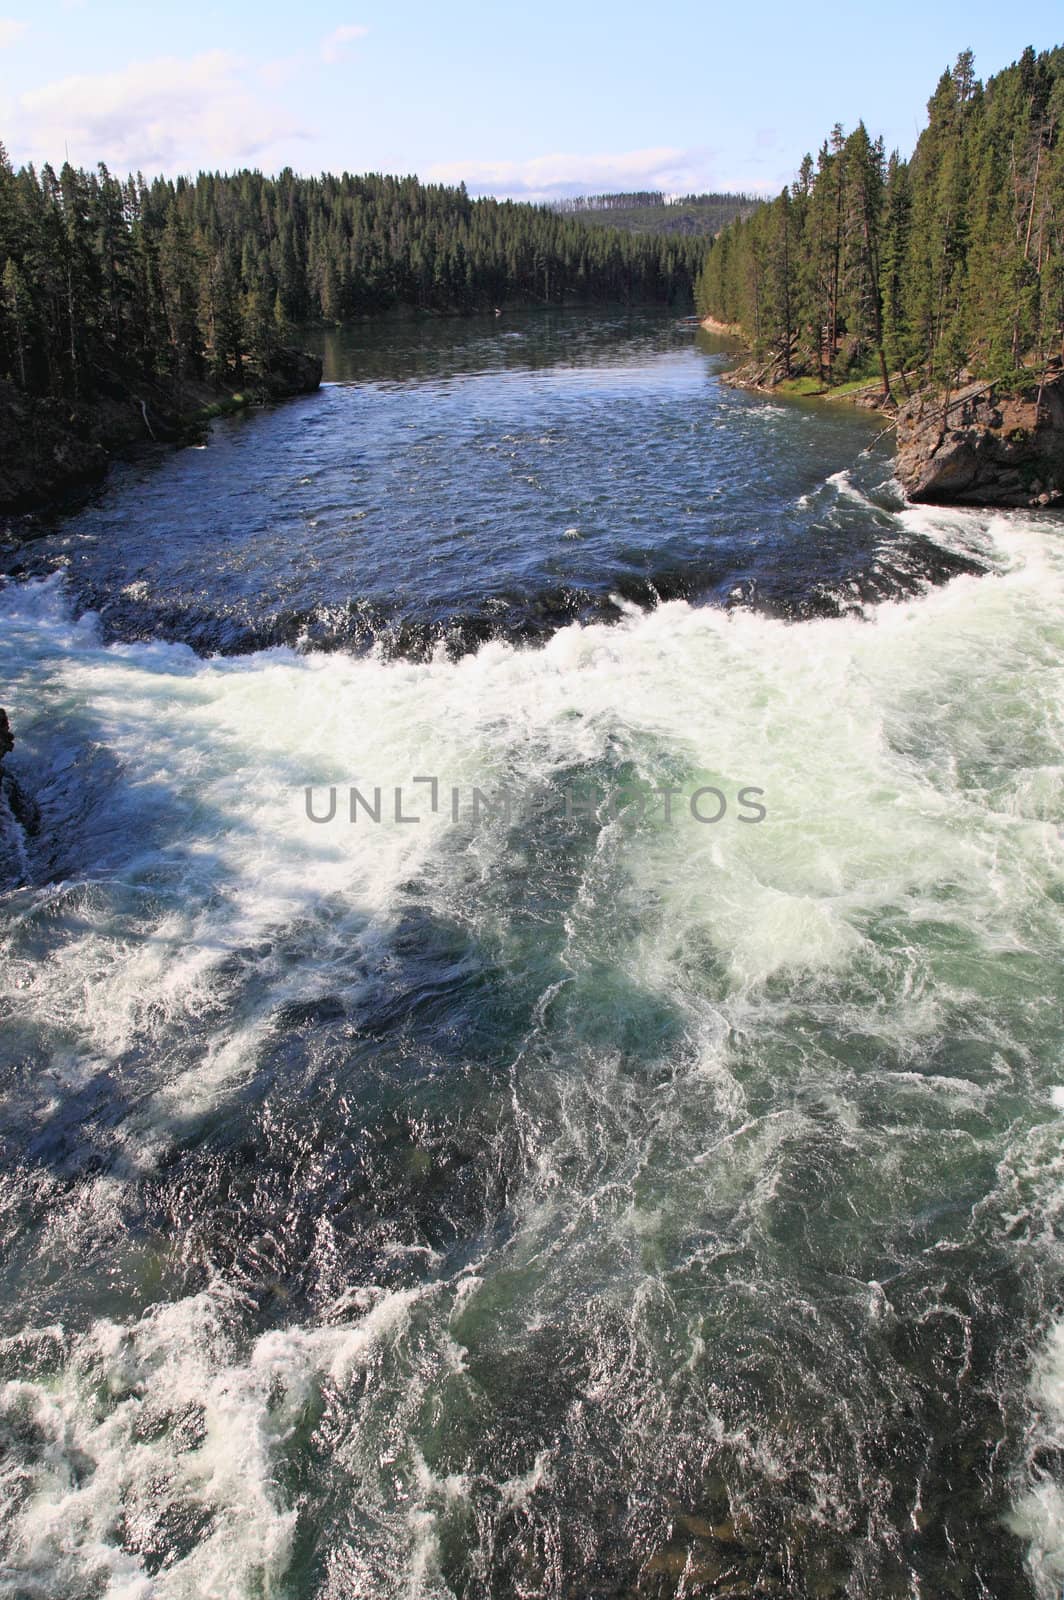 The Yellowstone River near Upper Falls at the Grand Canyon in the Yellowstone